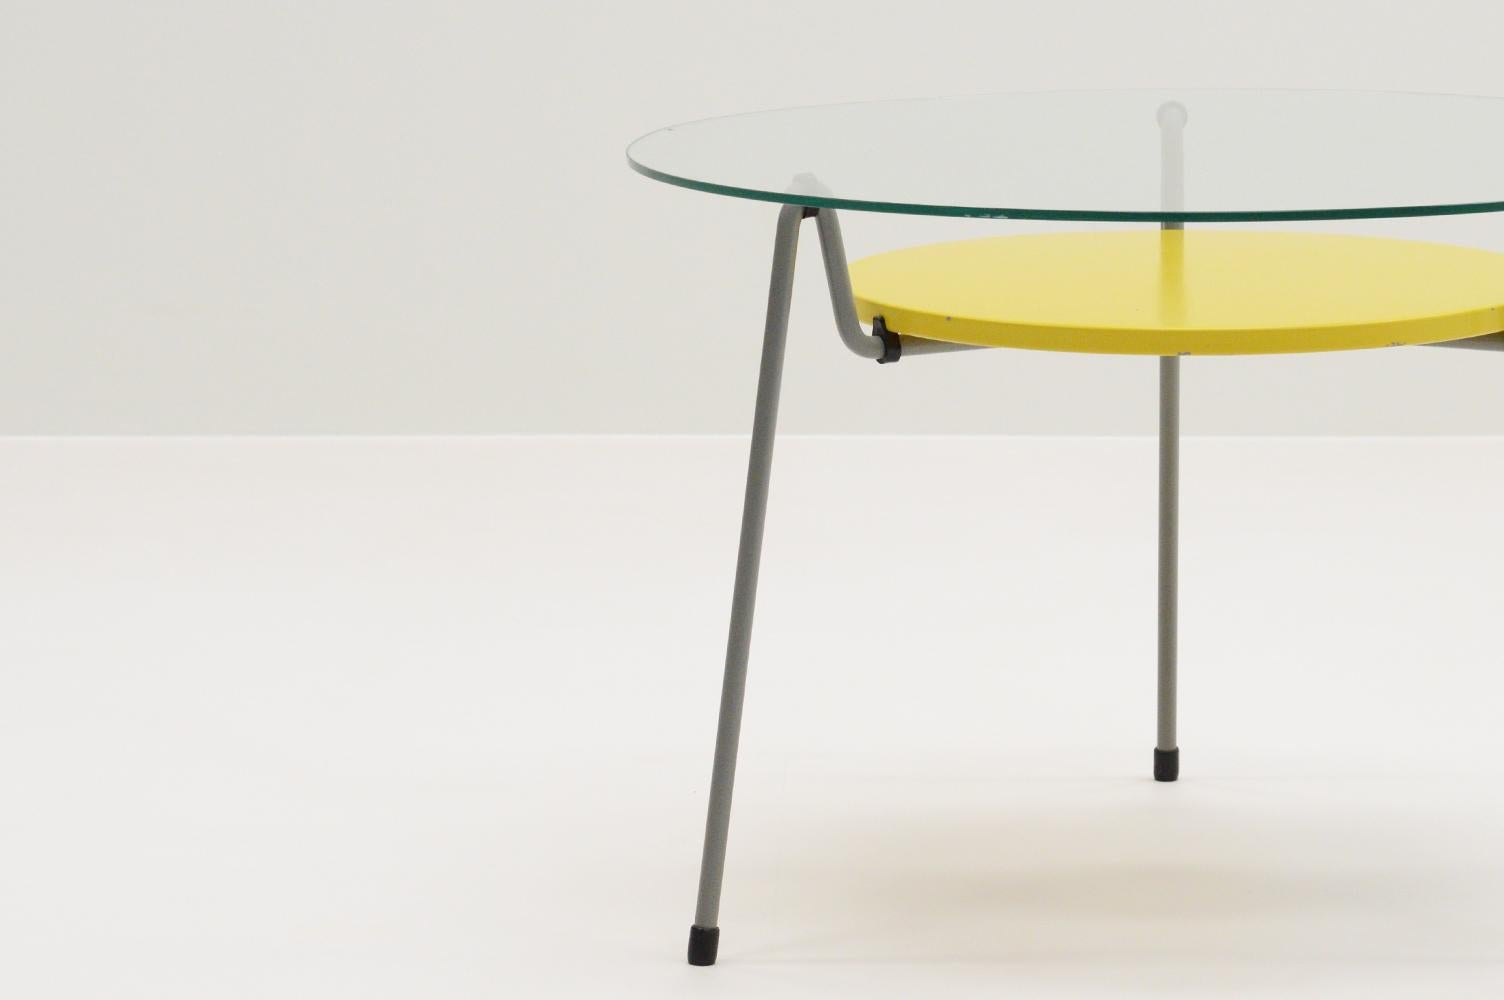 Dutch 535 table by Wim Rietveld for Gispen, The Netherlands 50s.